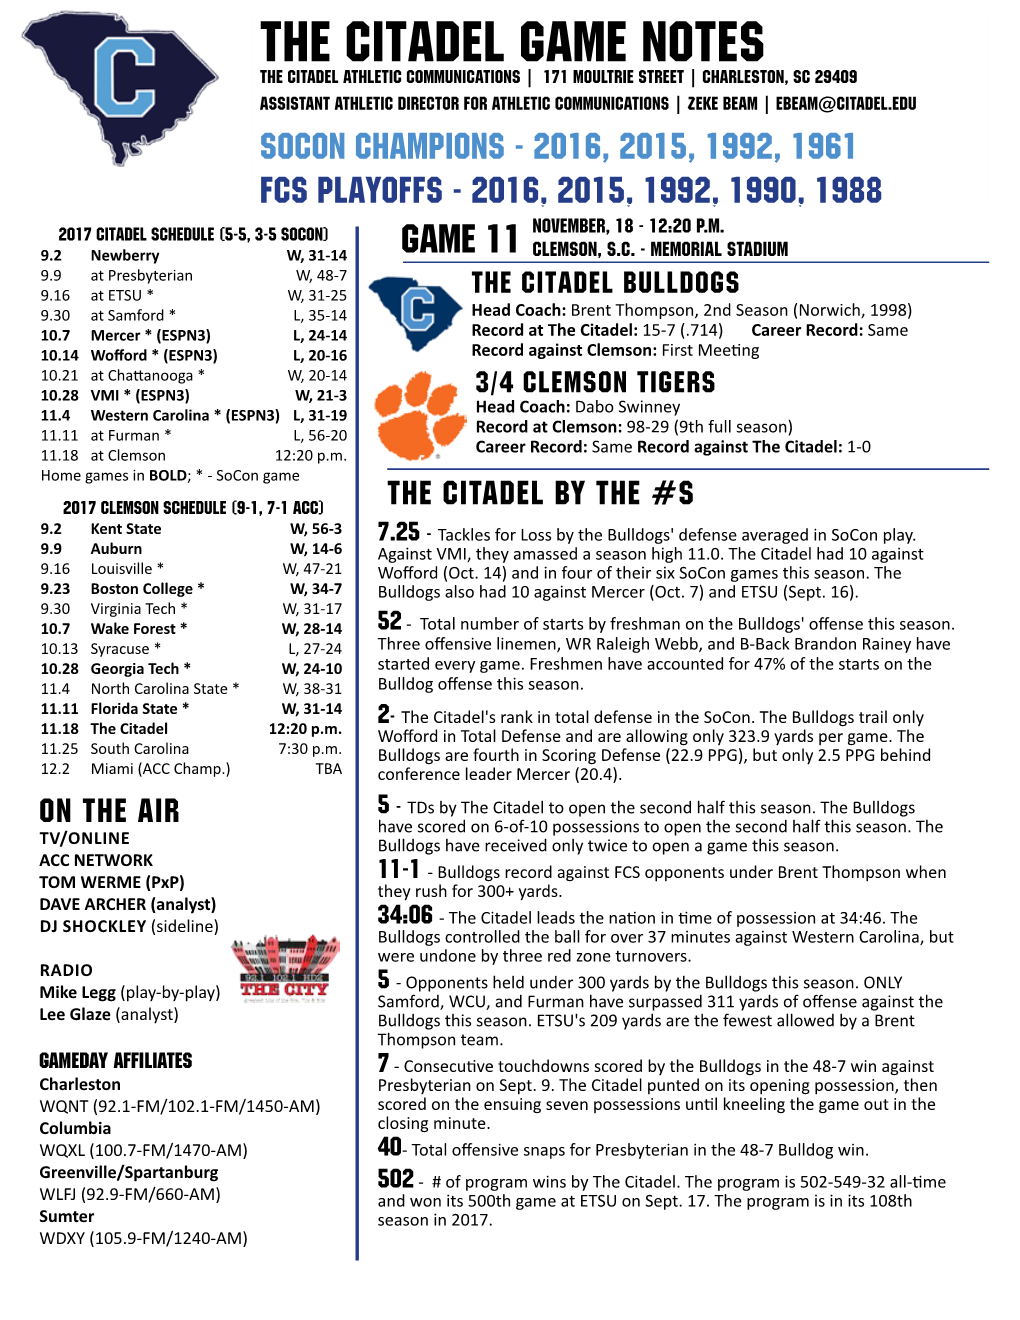 The Citadel Game Notes